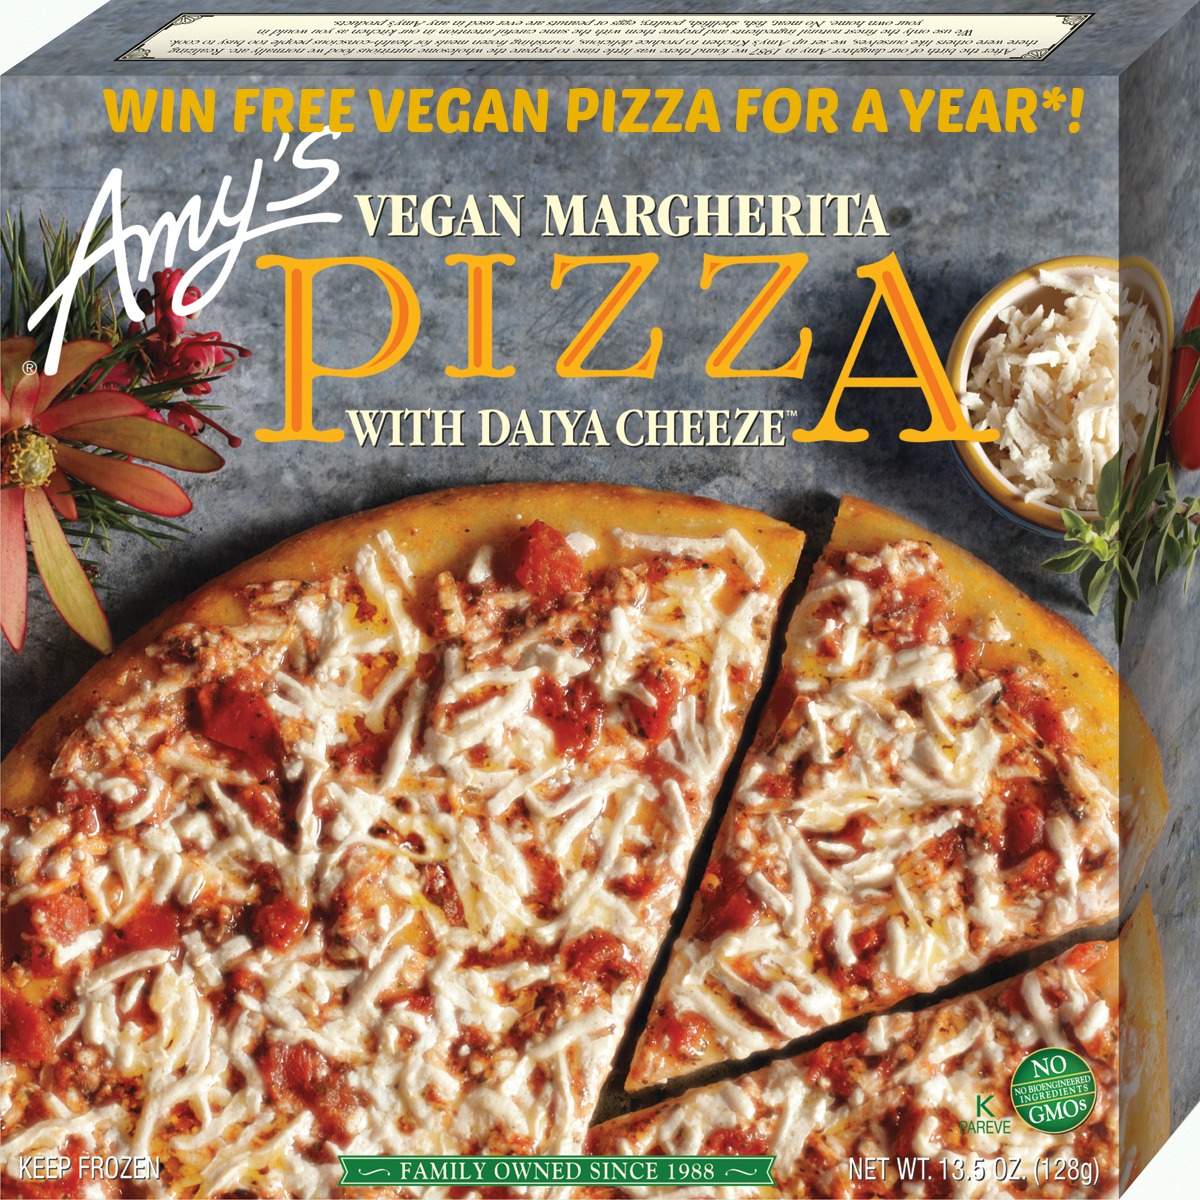 Win a Year’s Supply of Free Pizza from Amy’s Organics!